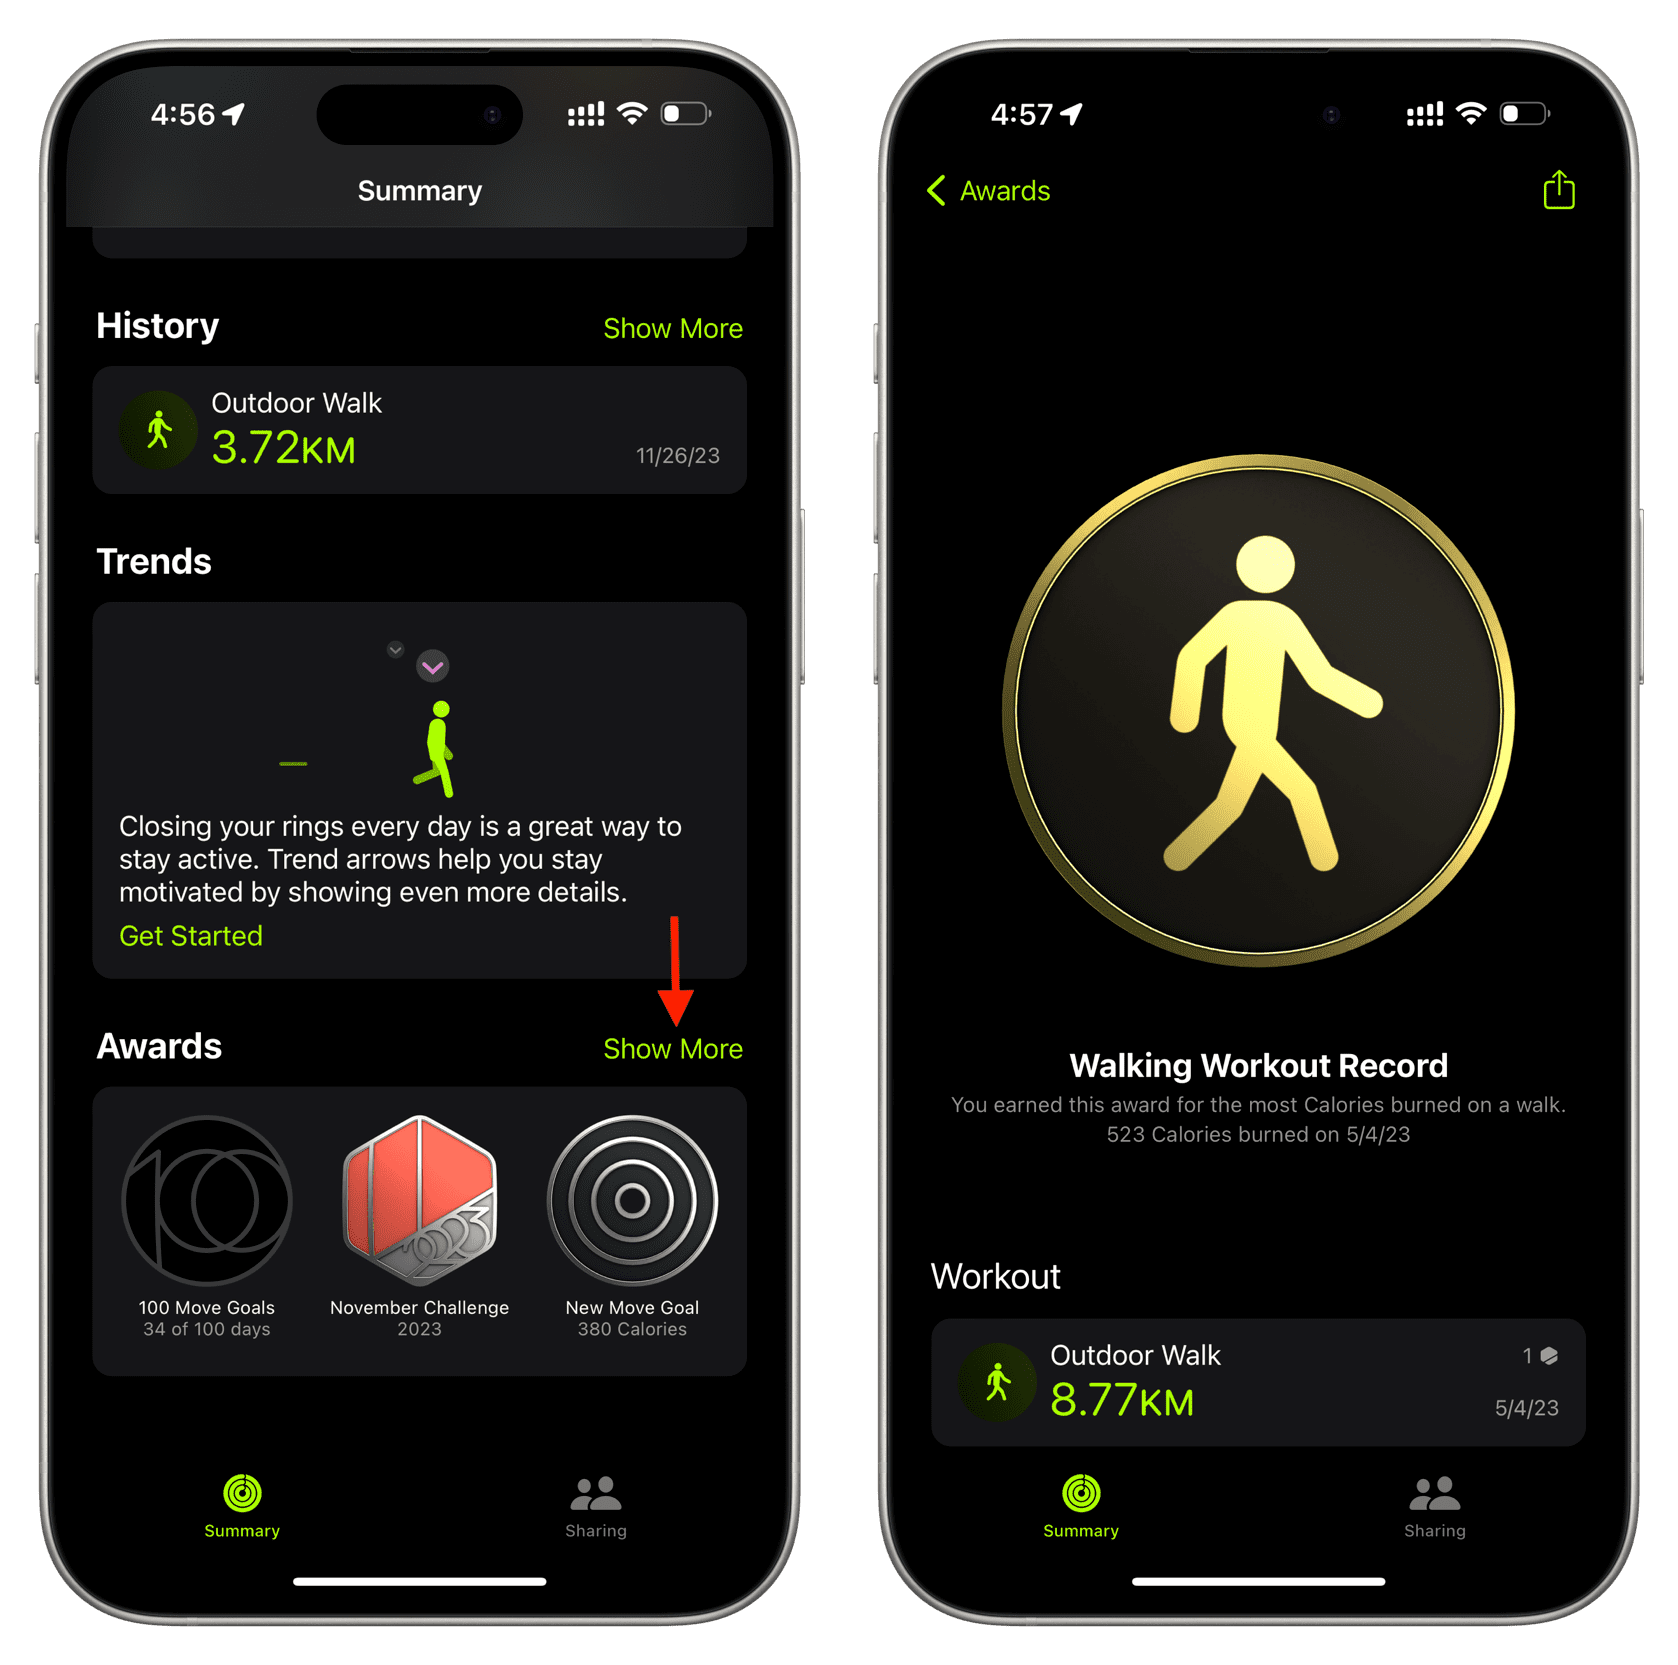 Awards in Fitness app on iPhone